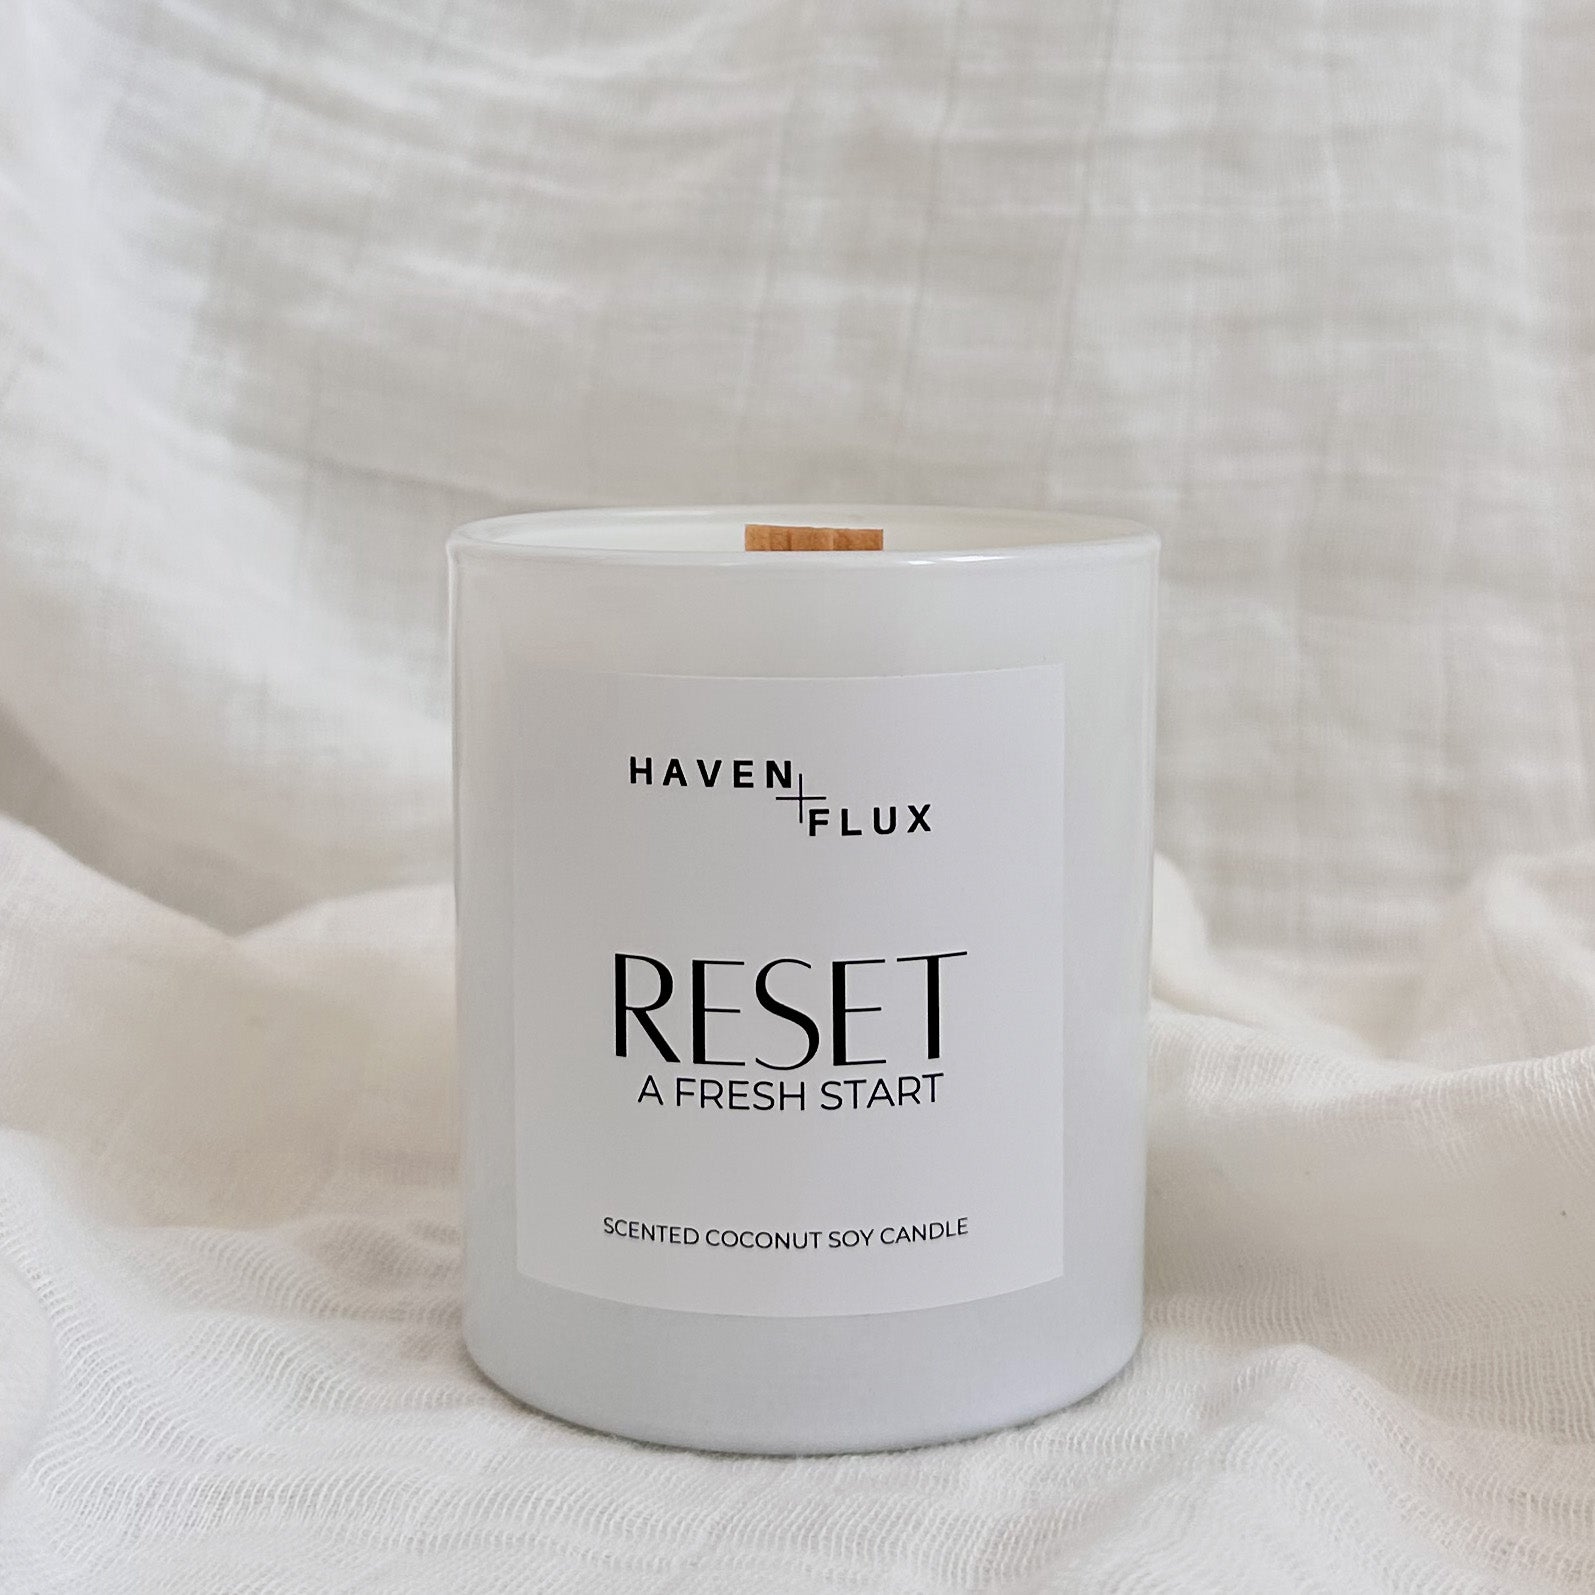 Non-Toxic Coconut Soy Wax Wooden Wick Reset a Fresh Start Intention Candle for Mental Health